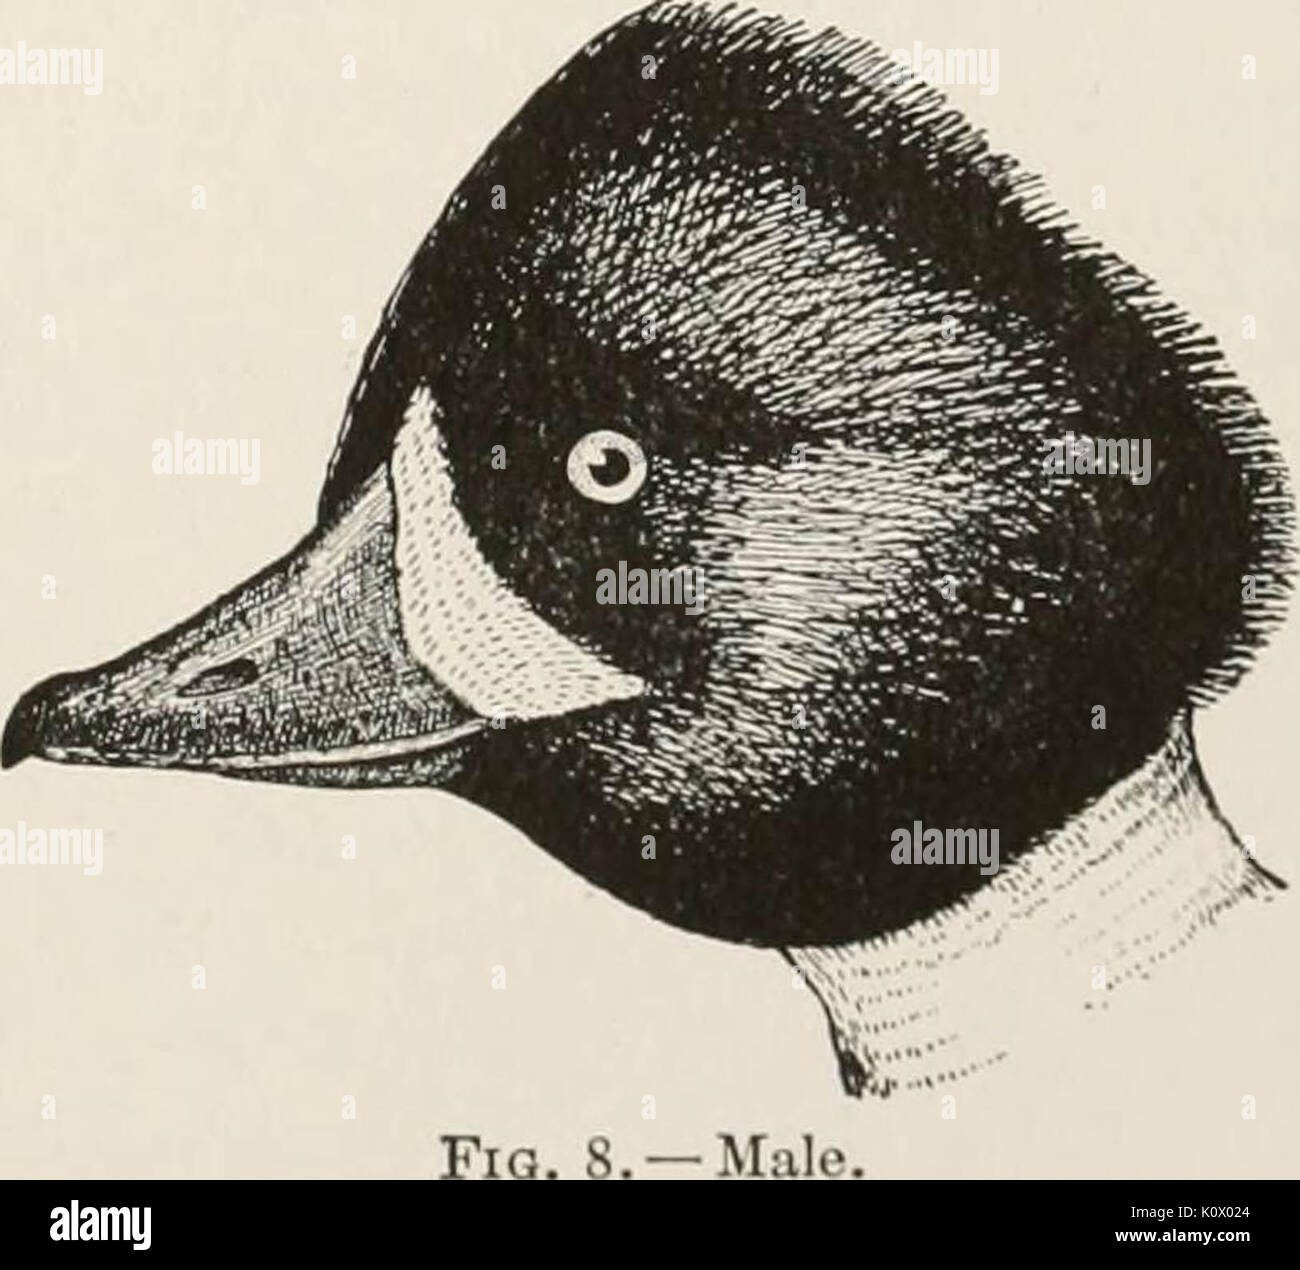 'A history of the game birds, wild-fowl and shore birds of Massachusetts and adjacent states... with observations on their...recent decrease in numbers; also the means for conserving those still in existence' (1912) Stock Photo